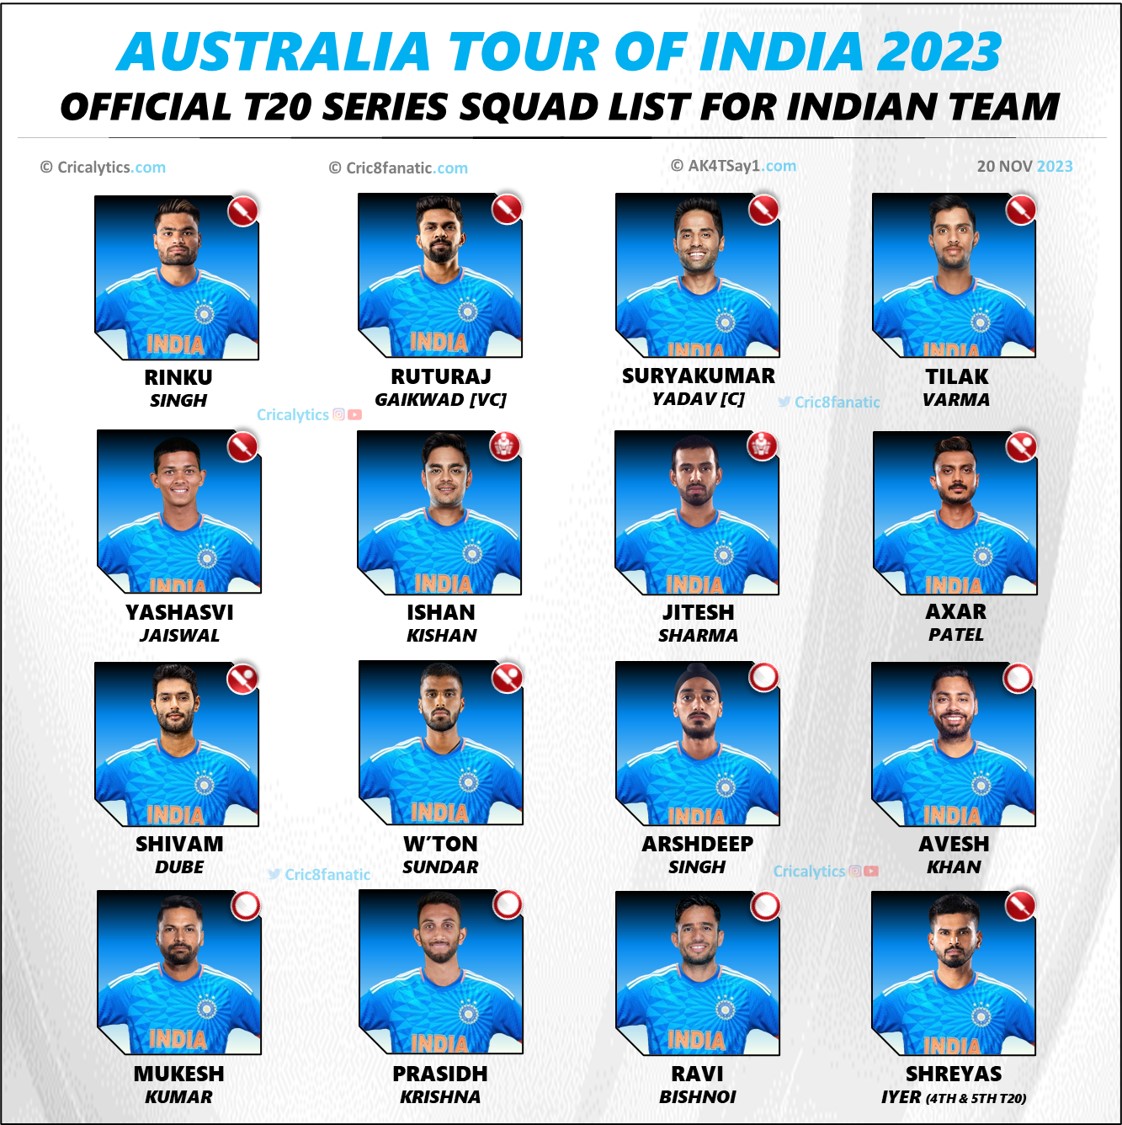 India vs Australia 2023 Full Official T20 Squad and Players List